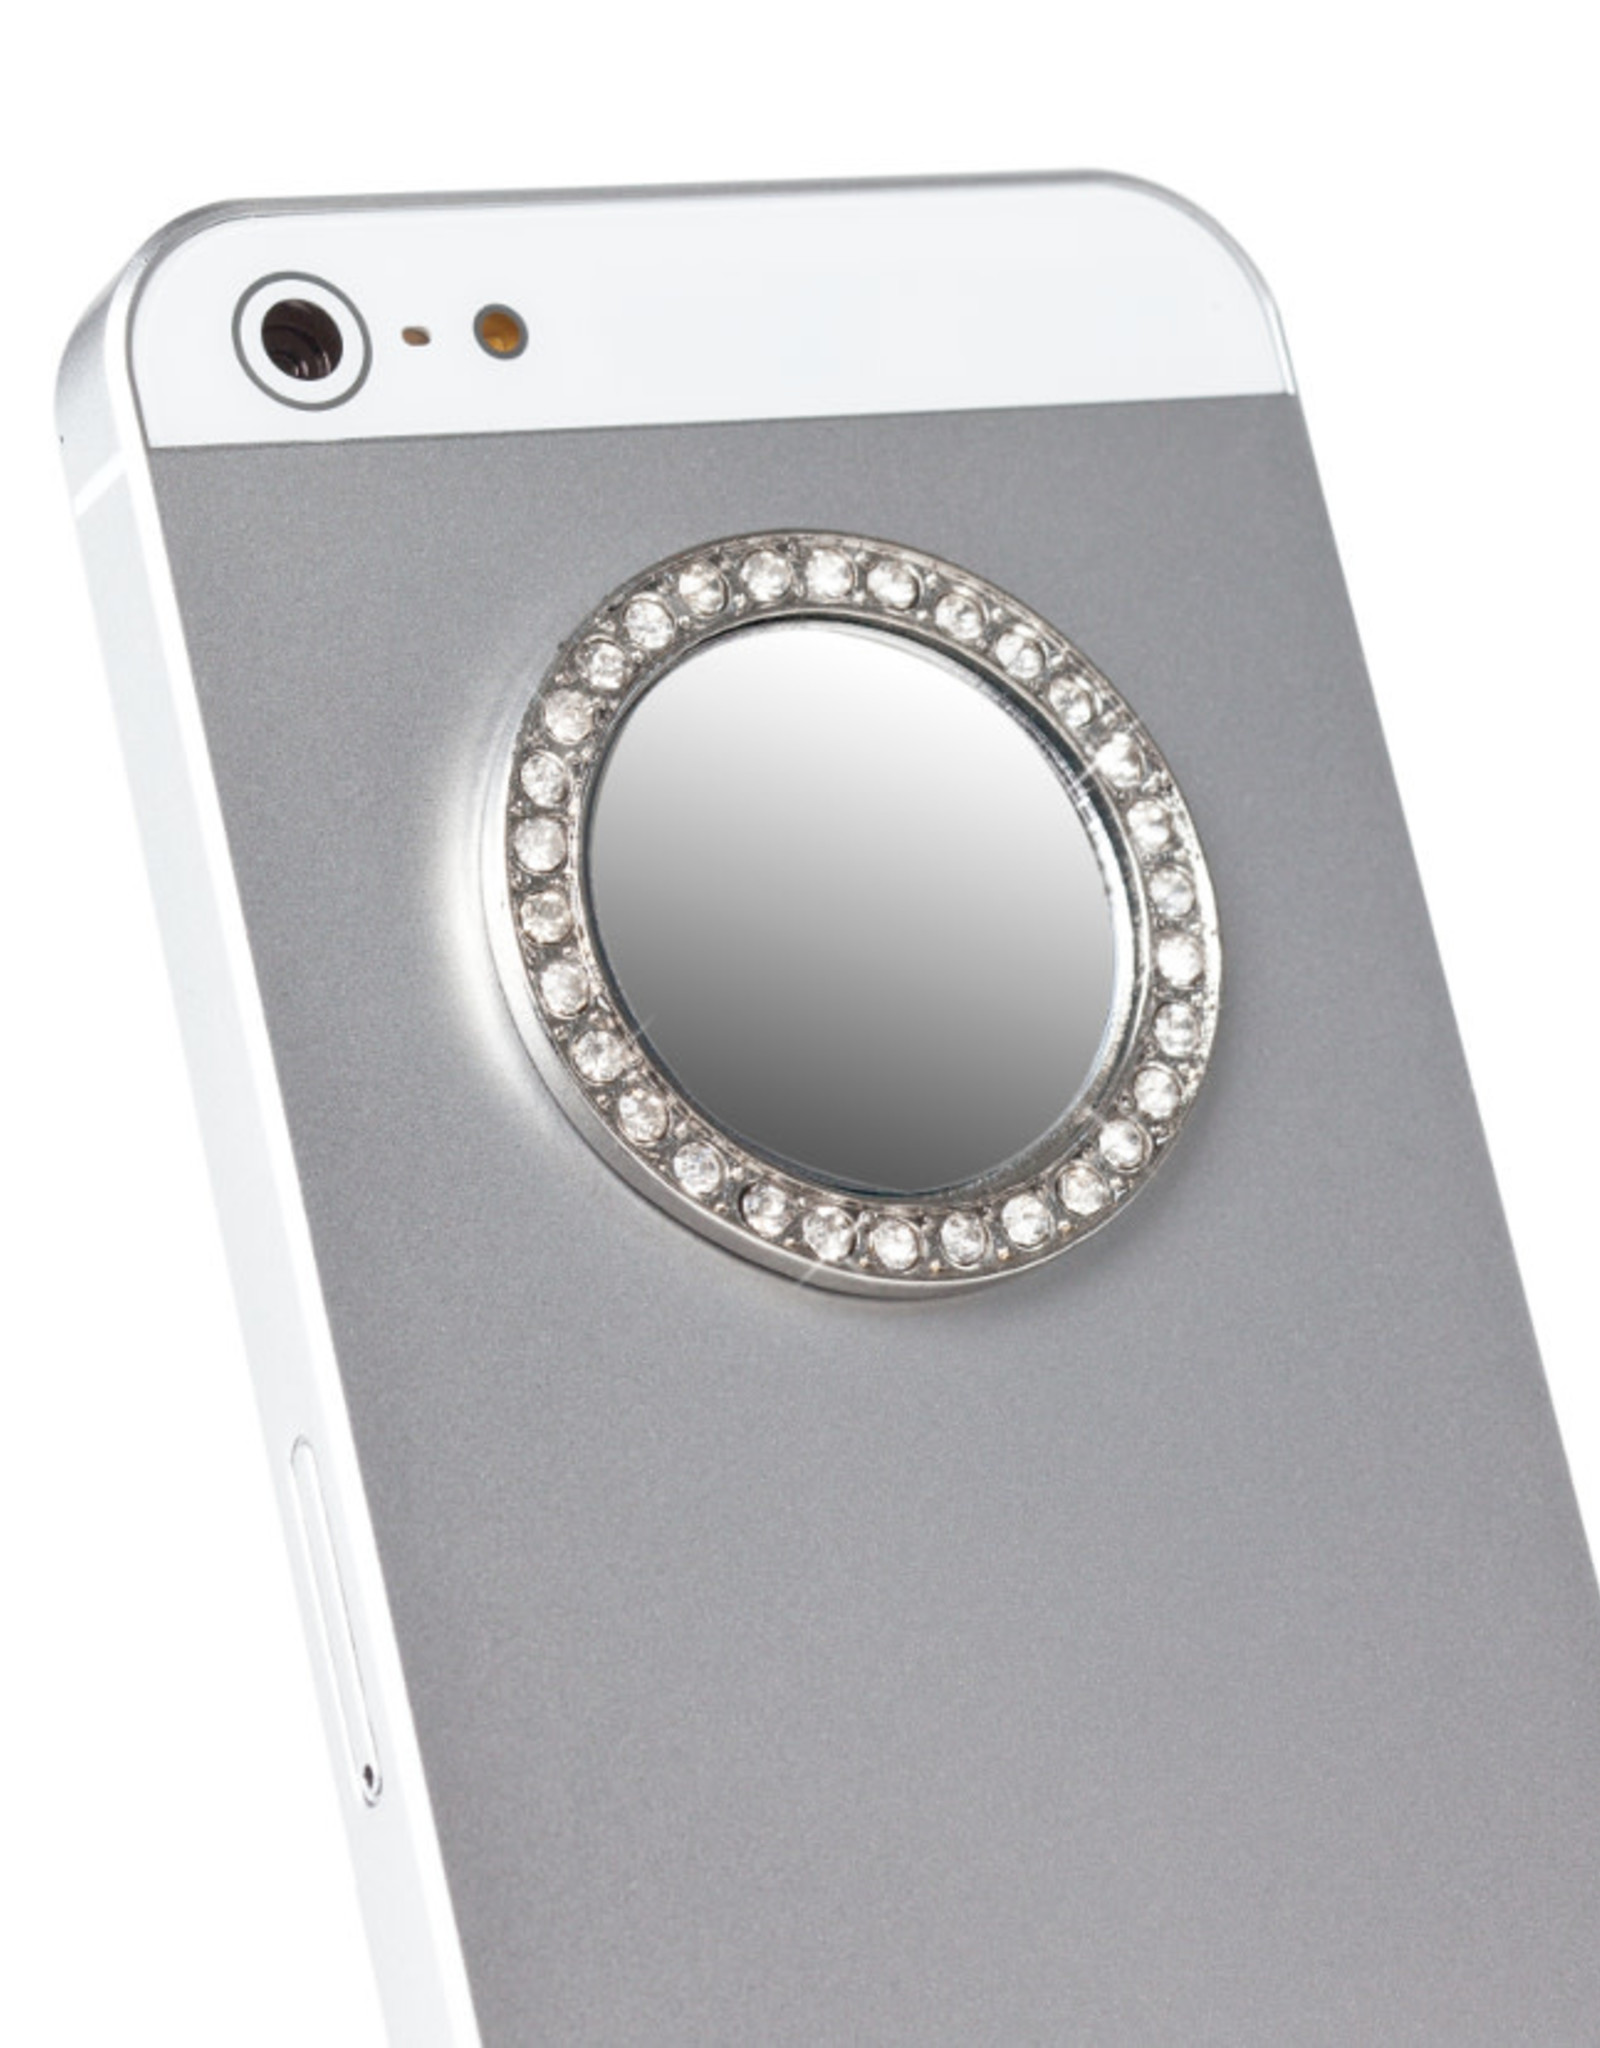 Oval Tech Mirror - Silver/Clear Crystals